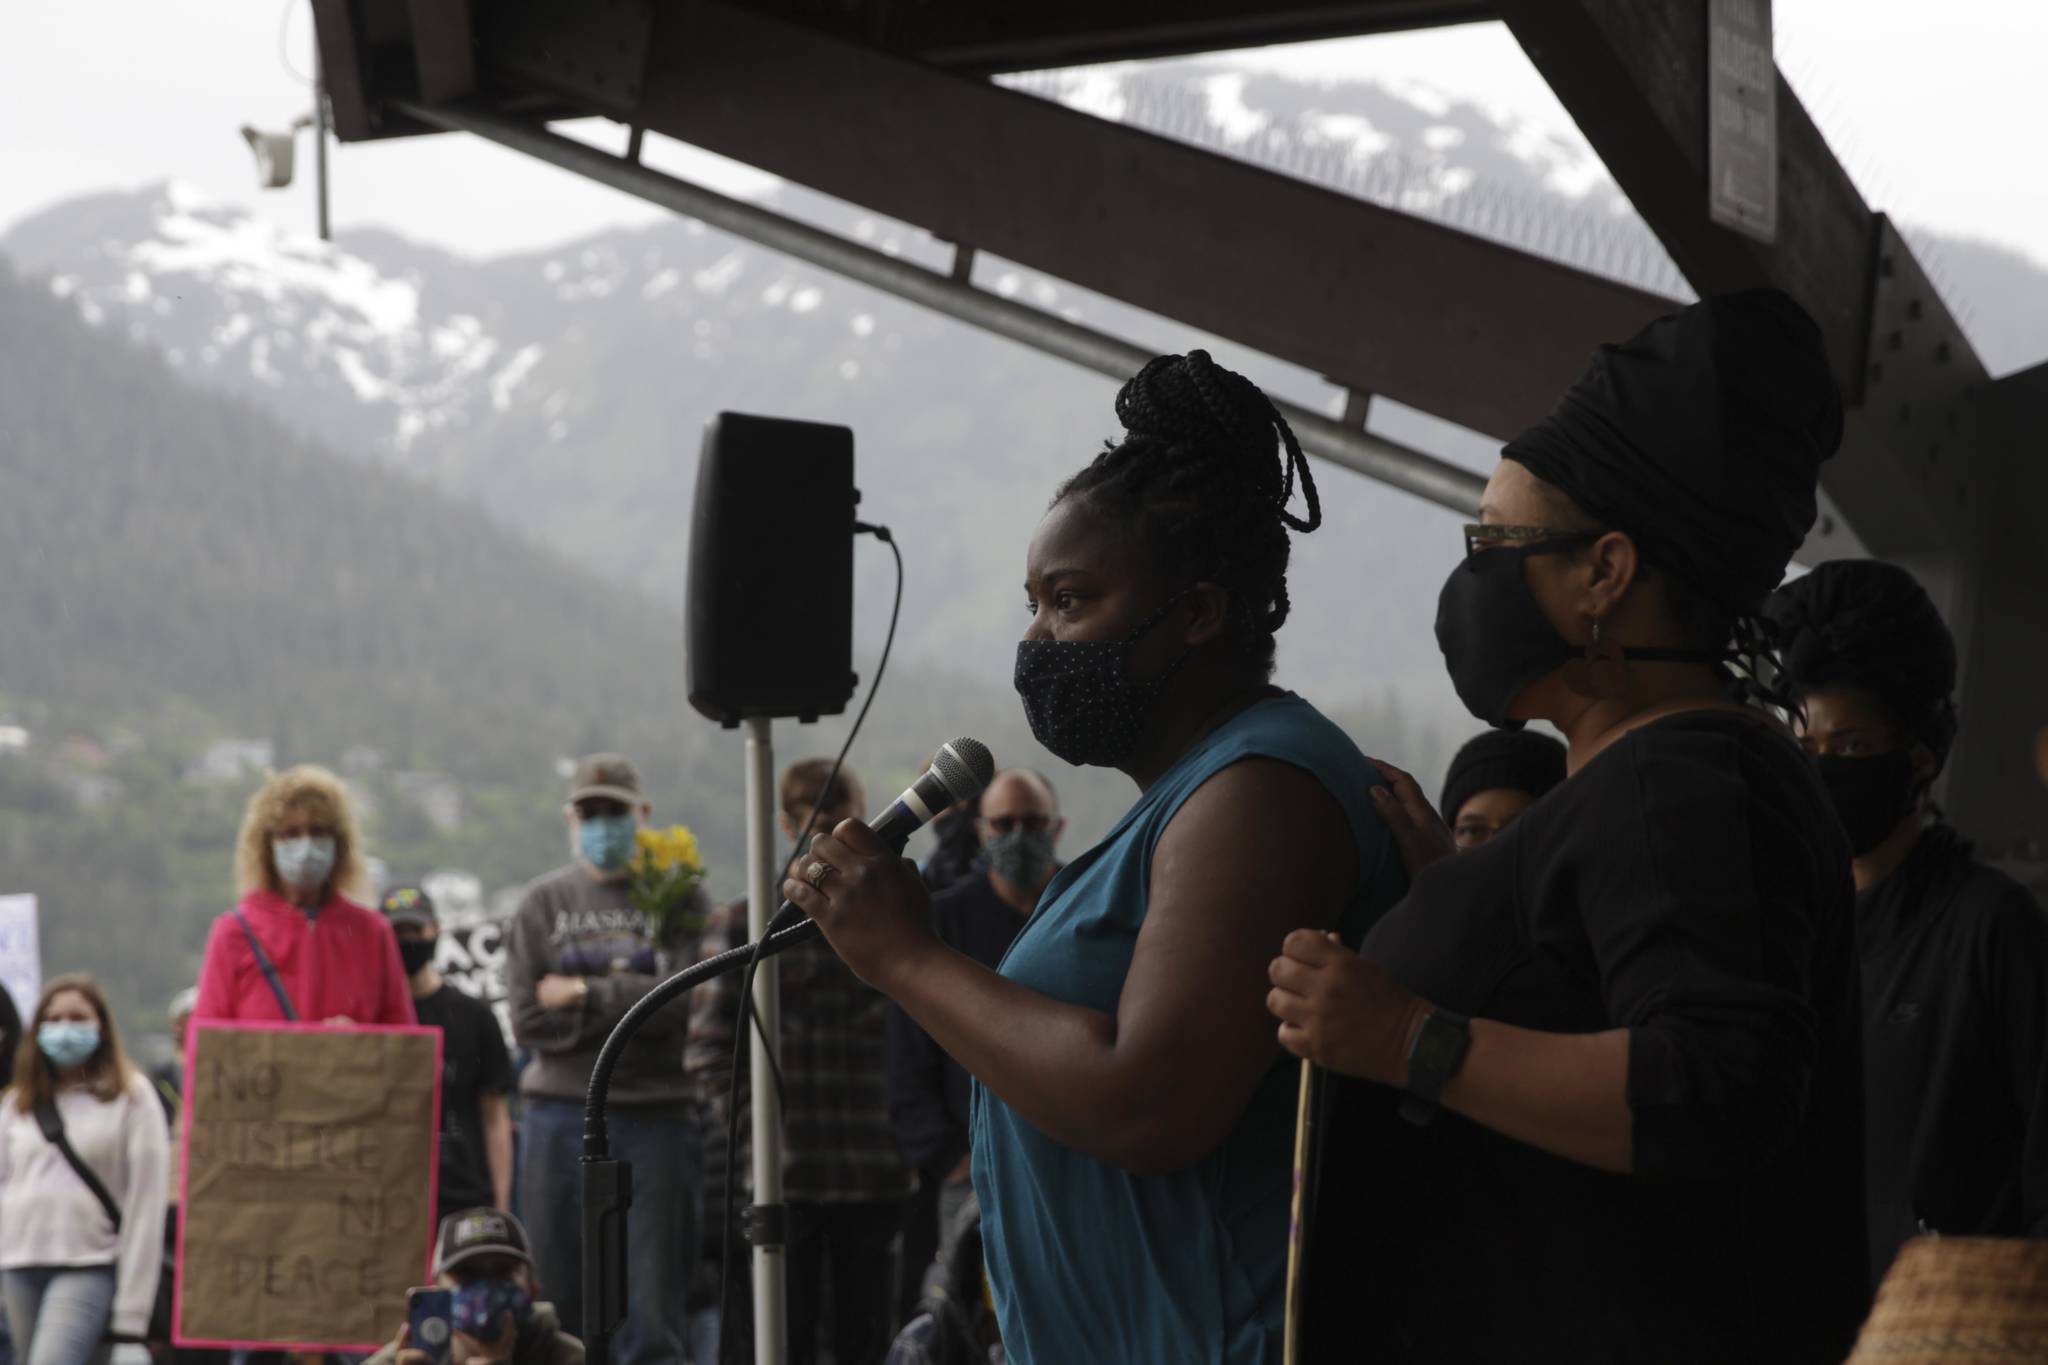 Leah Haskell-Cummins speaks during a rally for human rights and the sanctity of black lives in Marine Park on June 6, 2020, following the death of George Floyd in the custody of the Minneapolis Police Department. (Michael S. Lockett | Juneau Empire)